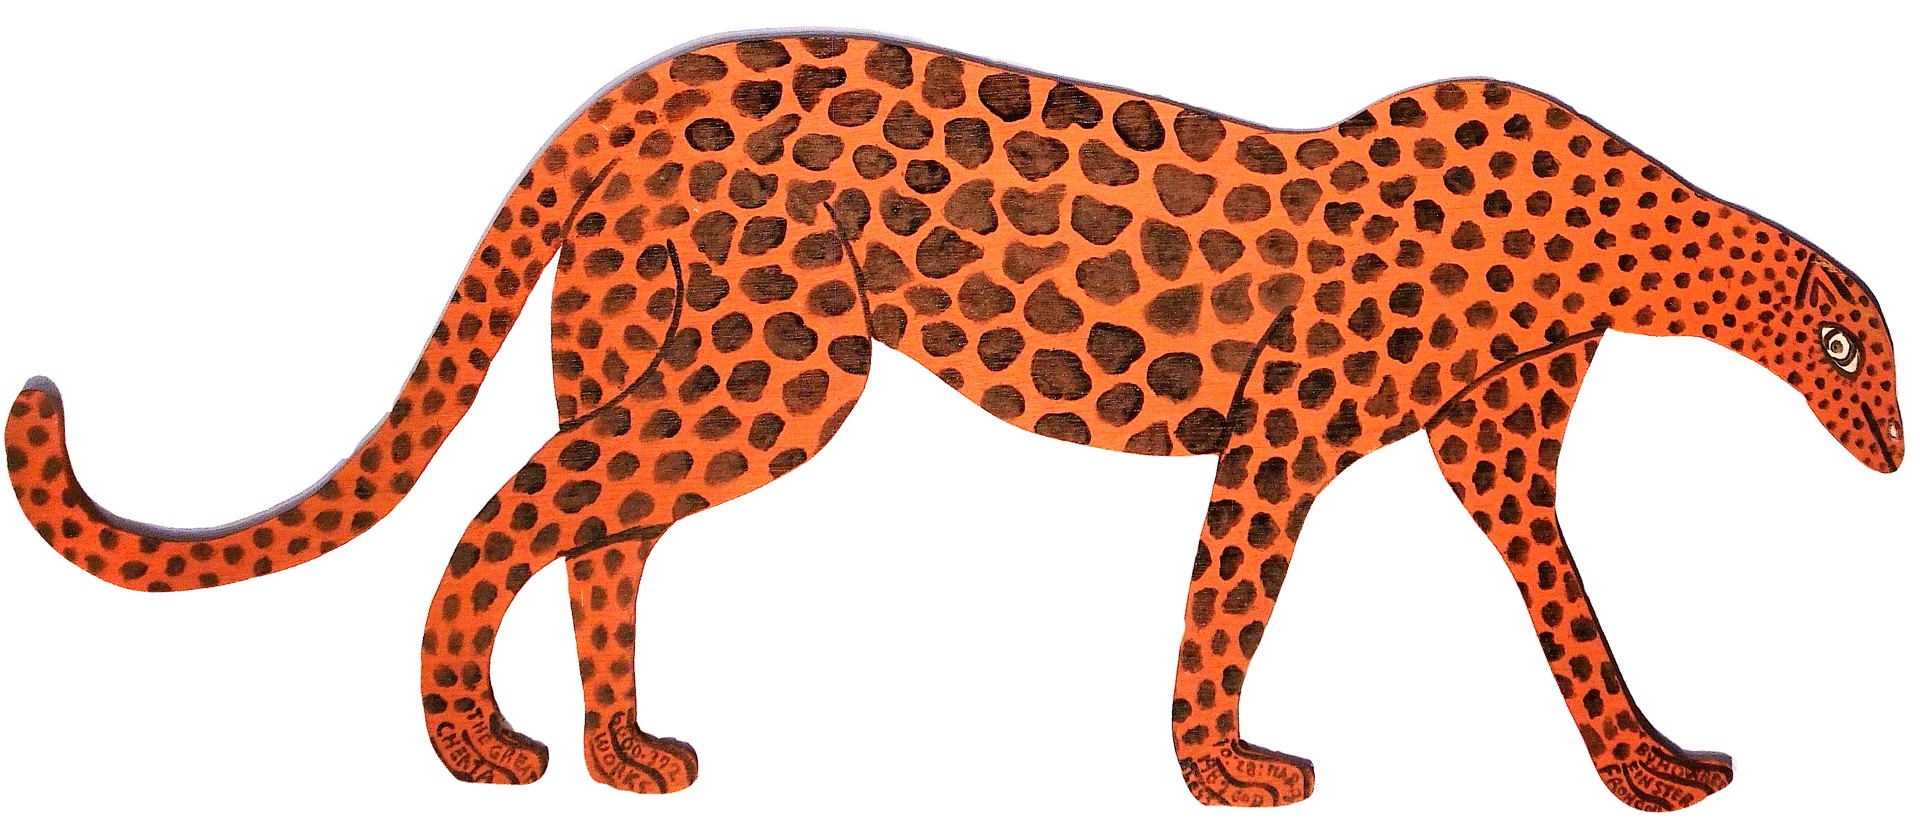 The Great Cheetah by Howard Finster